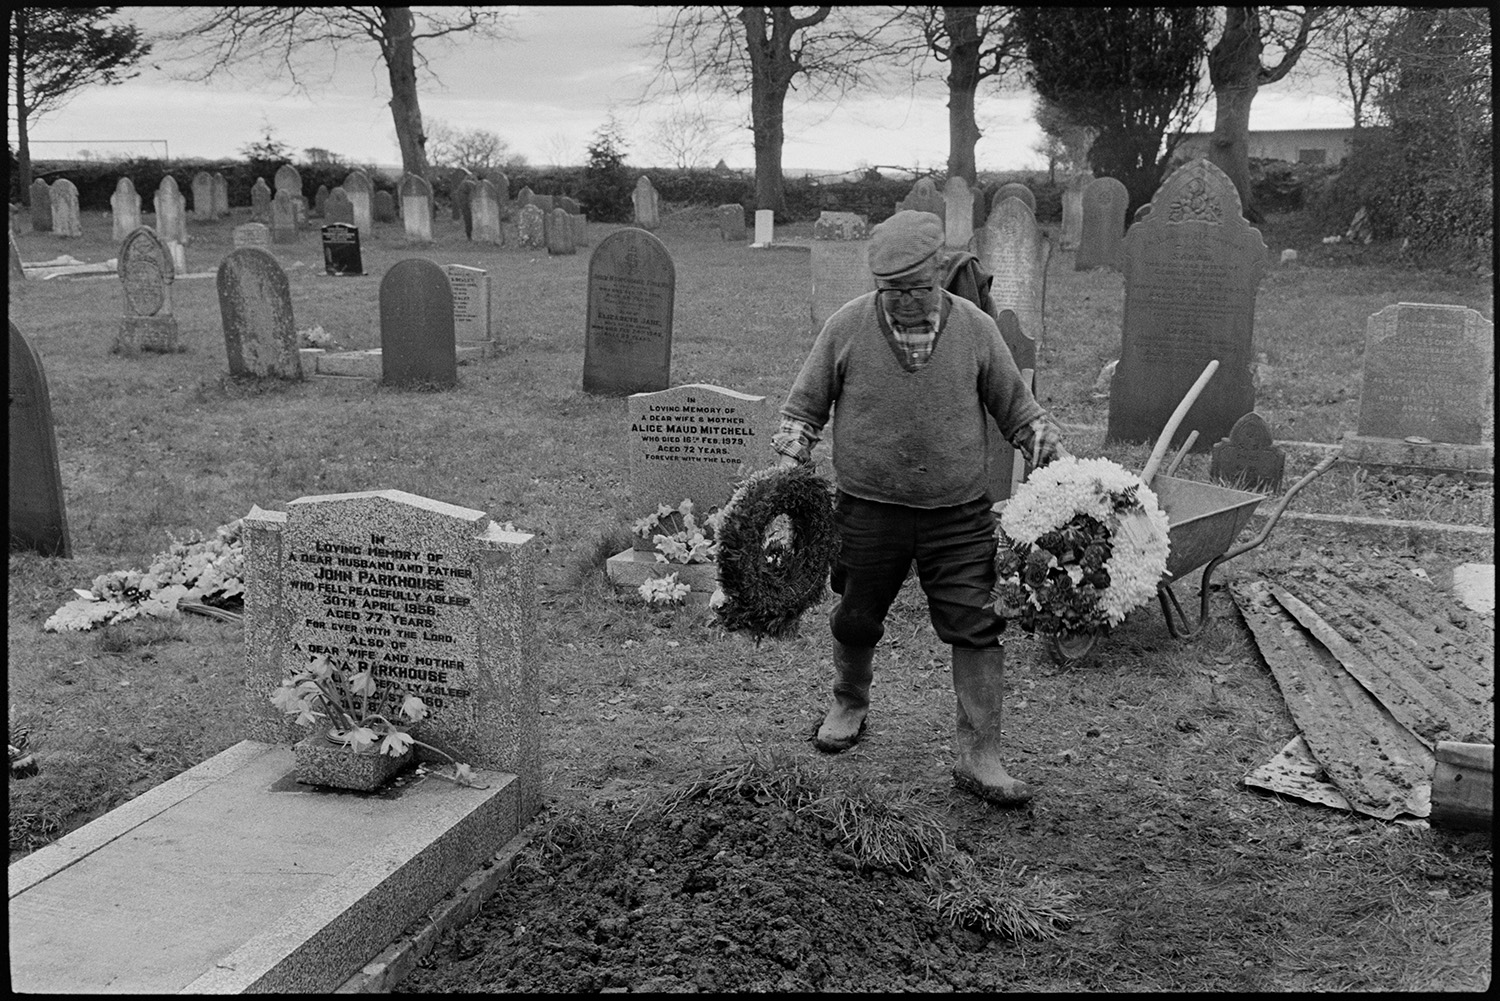 Gravedigger arranging flowers after funeral. 
[Reginald Rice arranging flowers on Archie Parkhouse's grave, after filling in the grave with earth, in Dolton churchyard. His wheelbarrow can be seen behind him. Other gravestones are visible, including Archie's parents' grave which is next to his.]